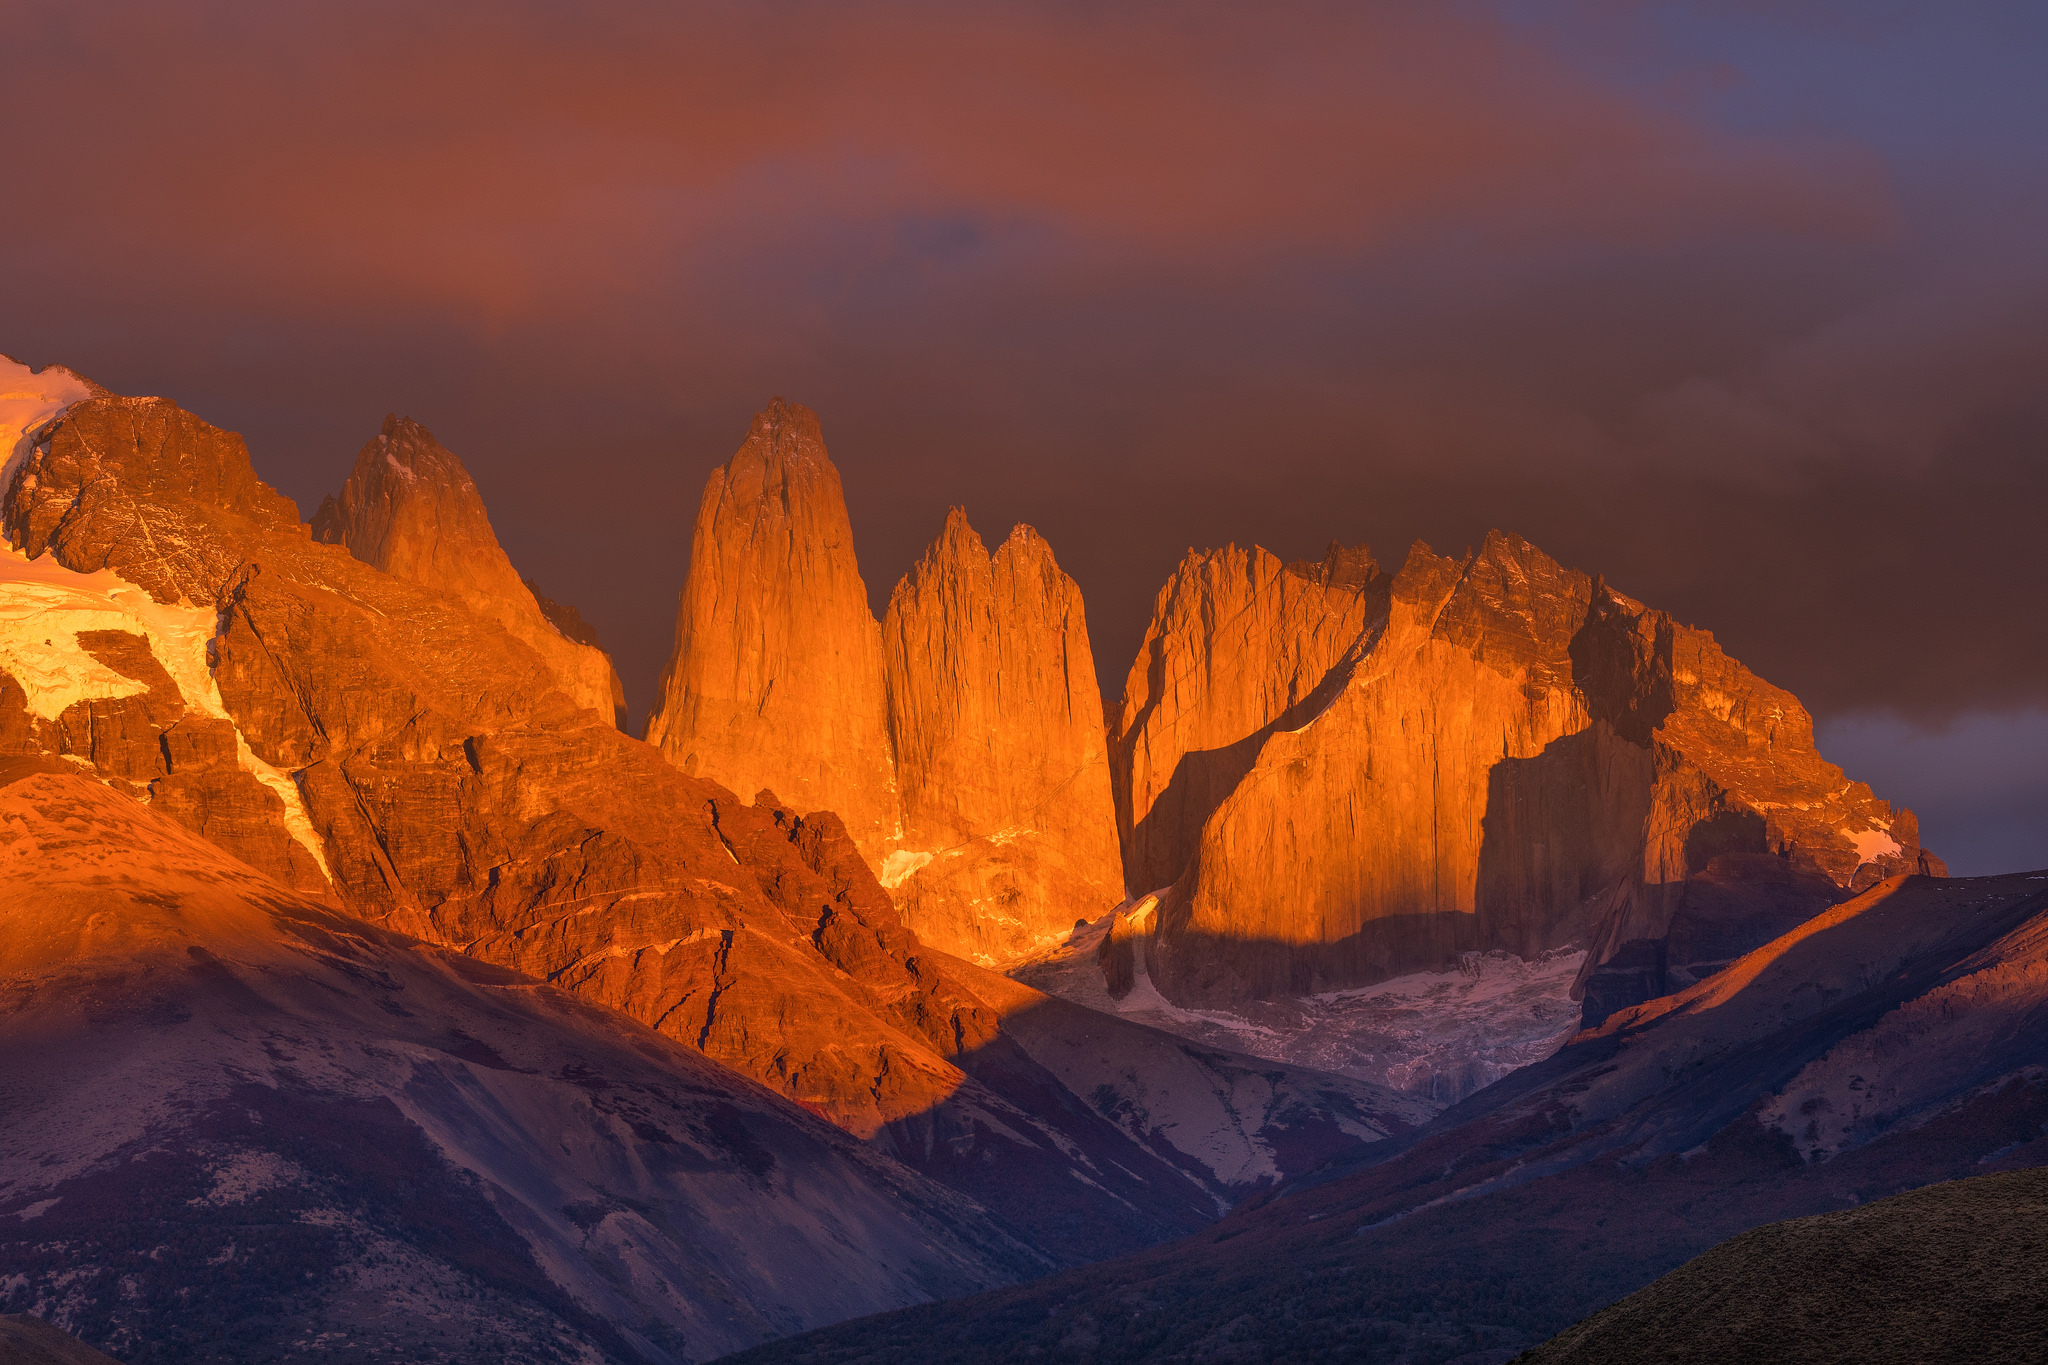 wp-content/uploads/itineraries/Chile/EcoCamp/Ecocamp-torres del paine- excursions 2.jpg